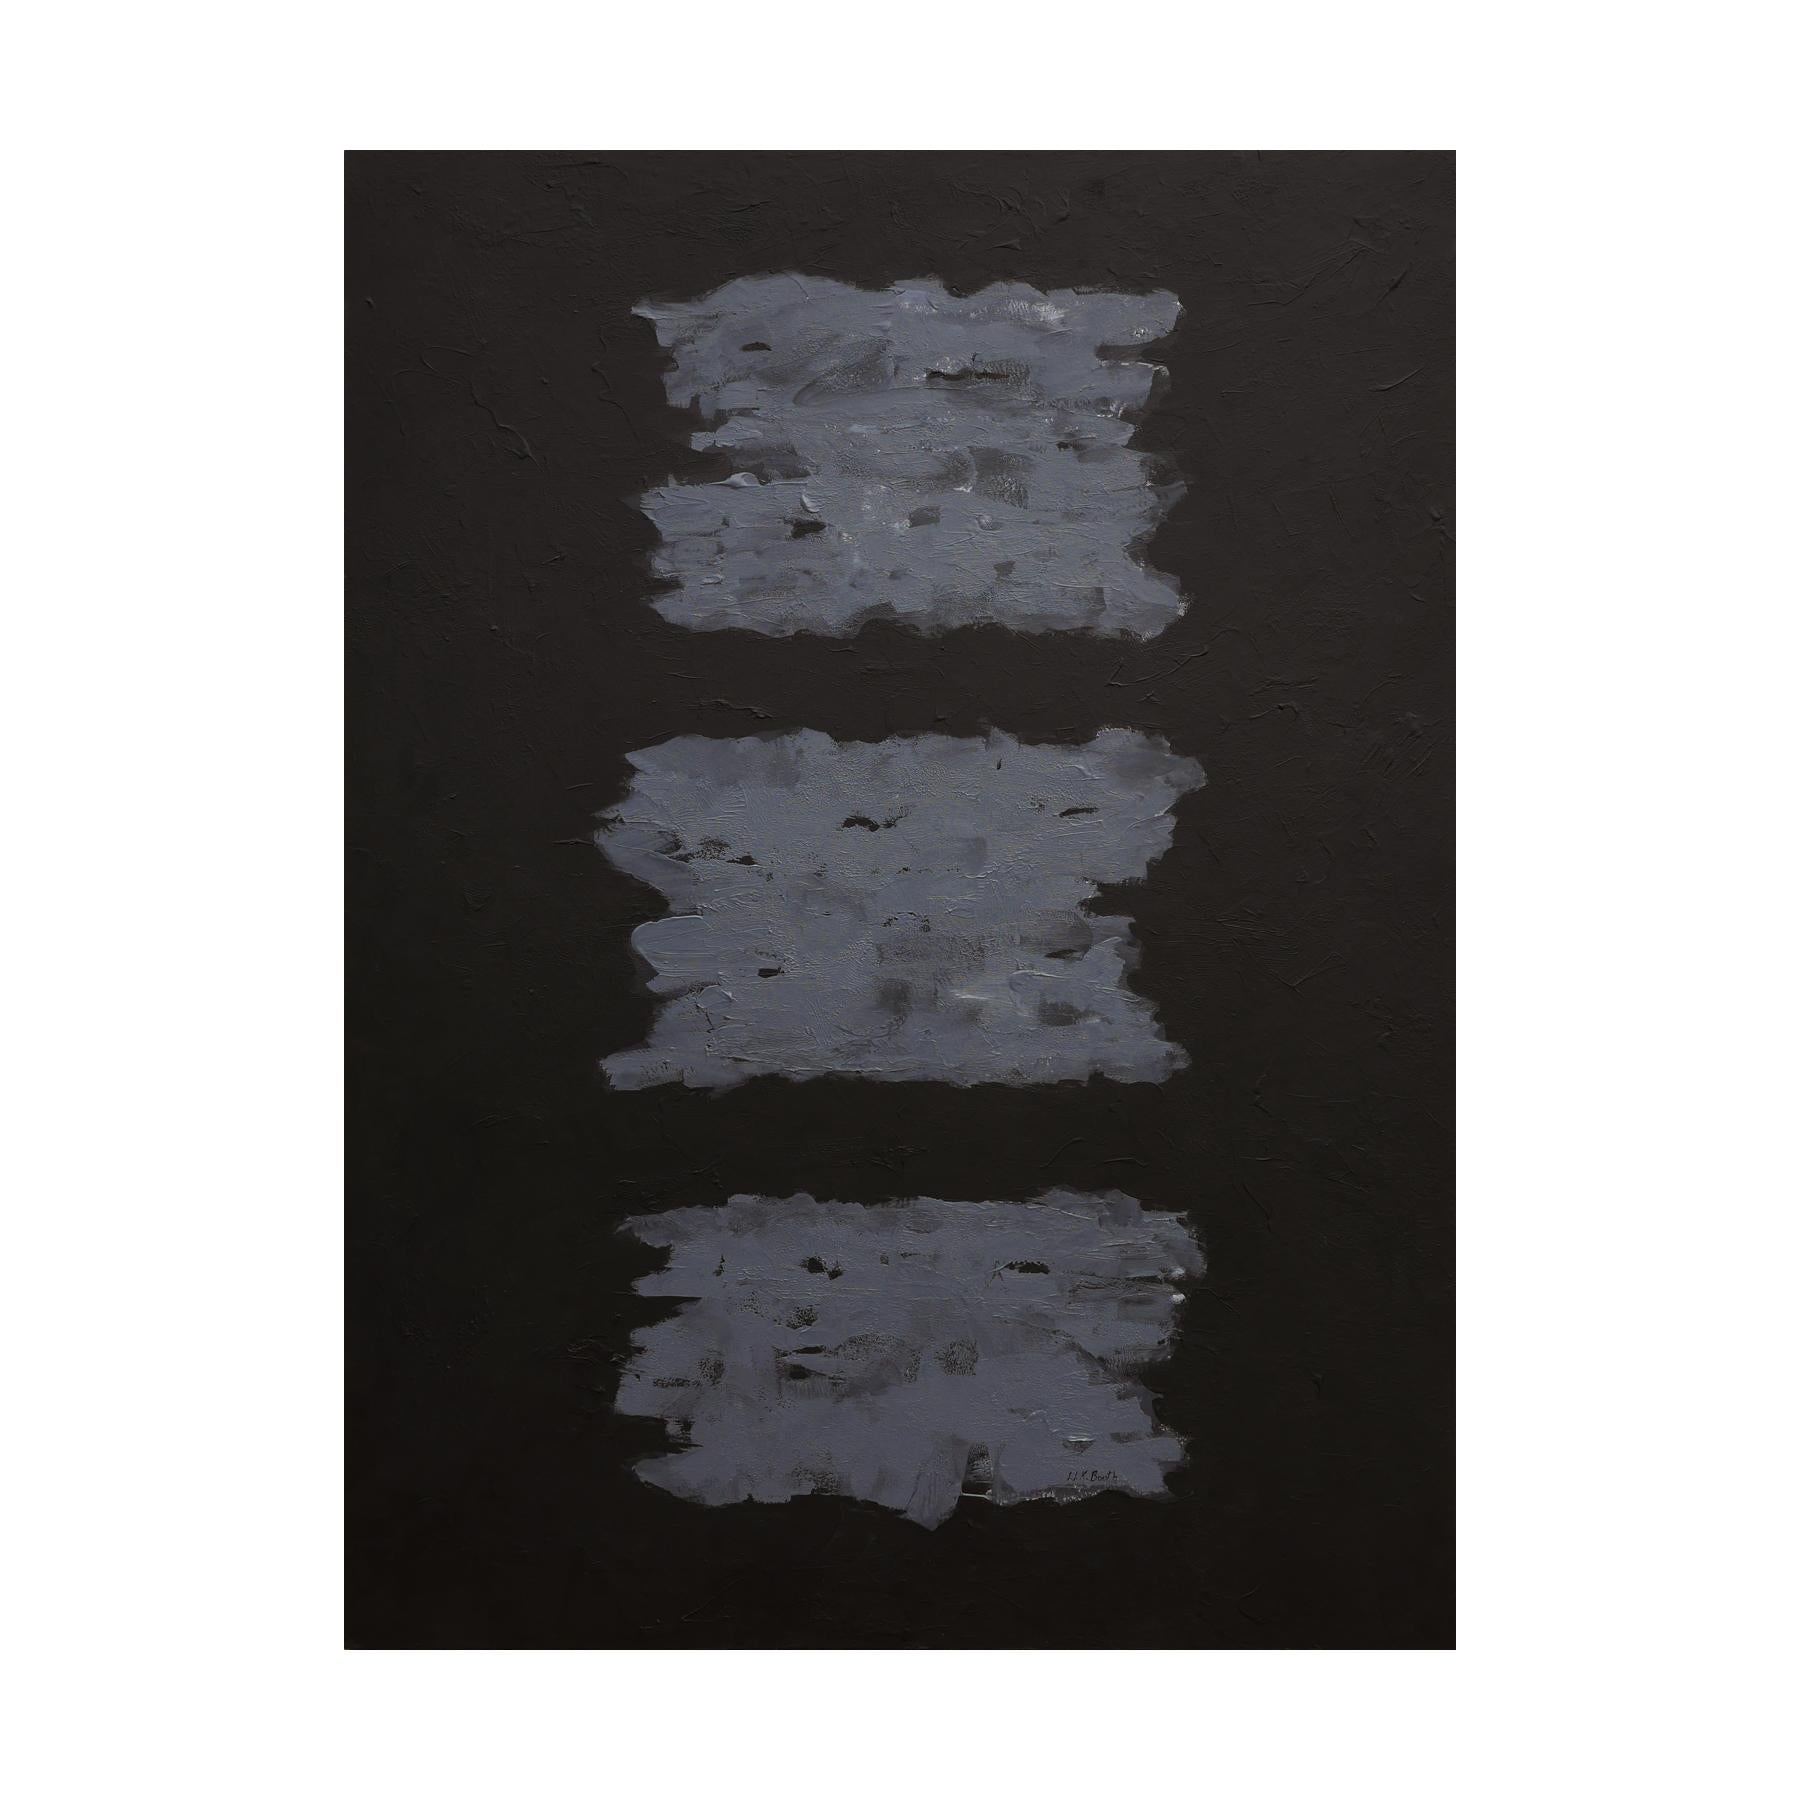 Black and gray abstract contemporary painting by Houston, TX artist Winifred Booth. The painting depicts 3 gray rectangular cloud-like shapes against a plain black background. Unframed. Signed by the artist at the bottom right.

Artist Biography: